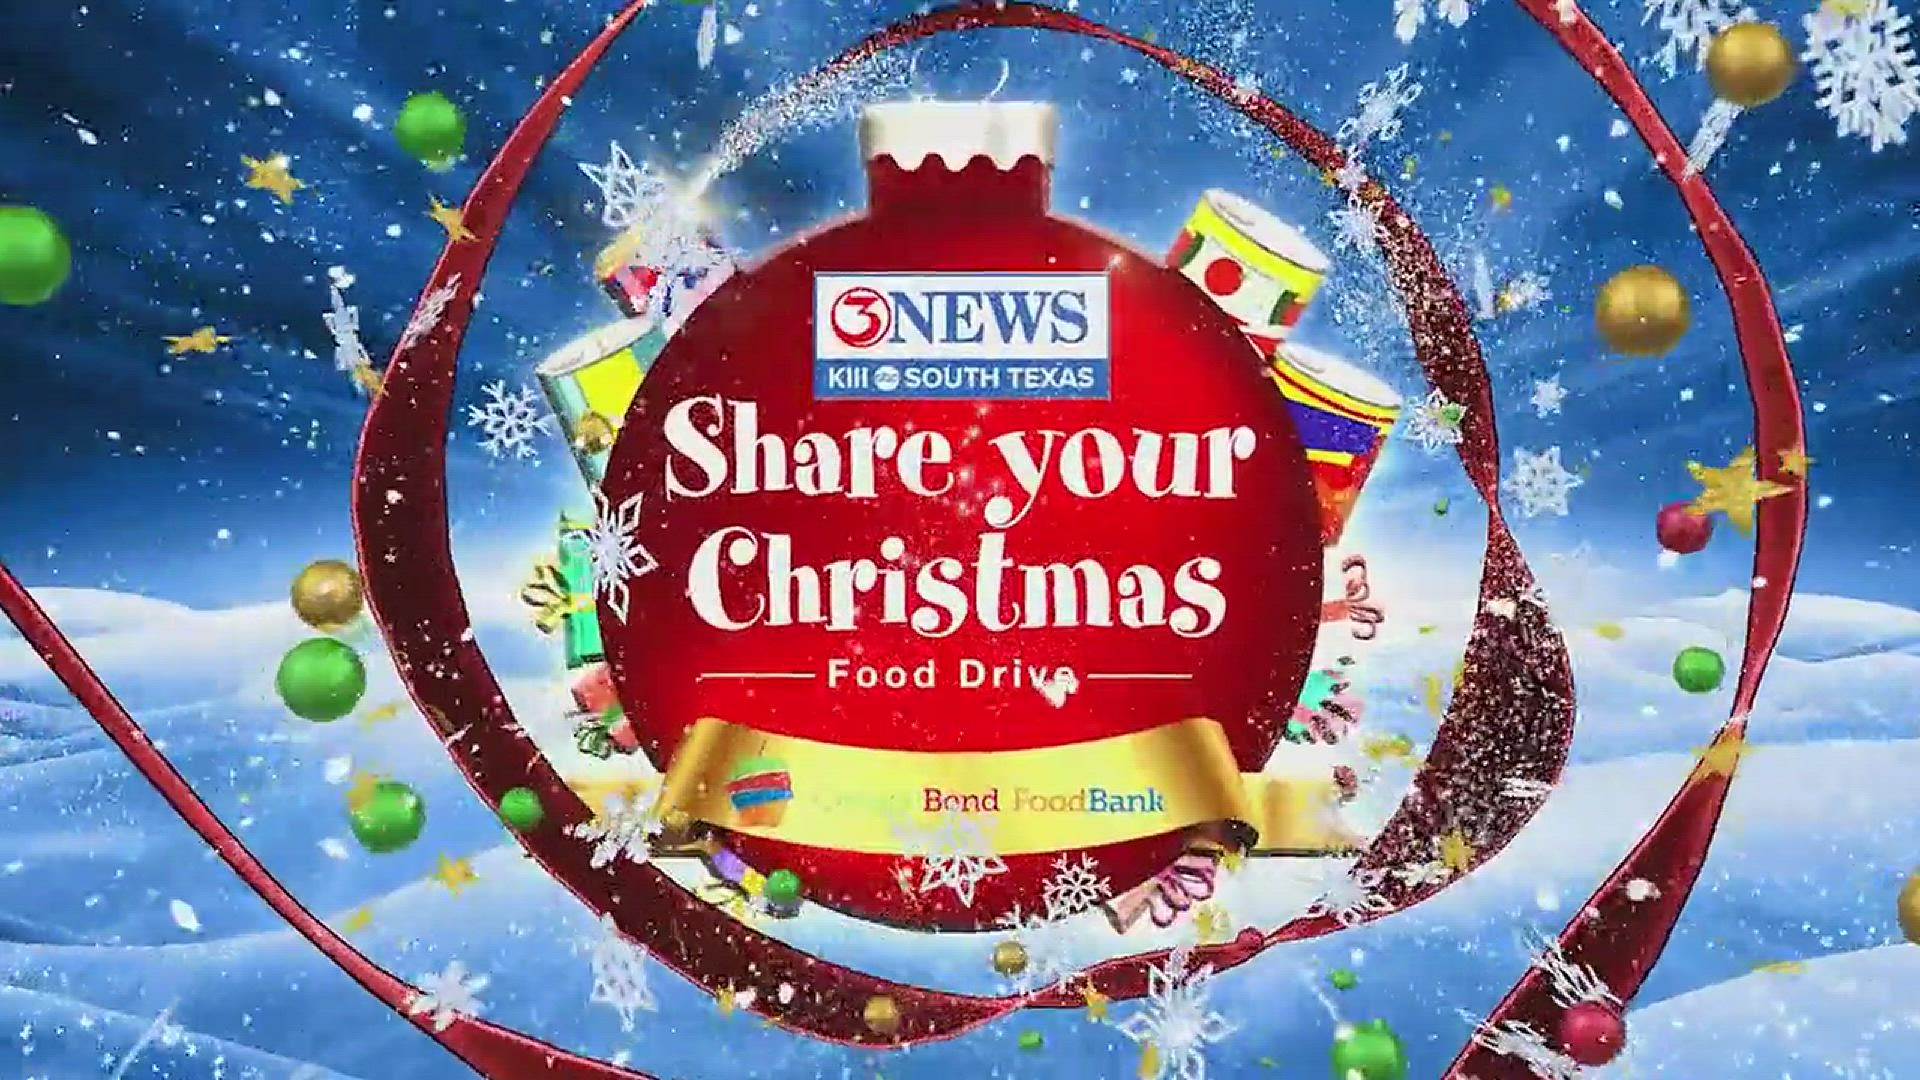 Join KIII and the Coastal Bend Food Bank to make a difference in our community and help feed those in need this holiday season.